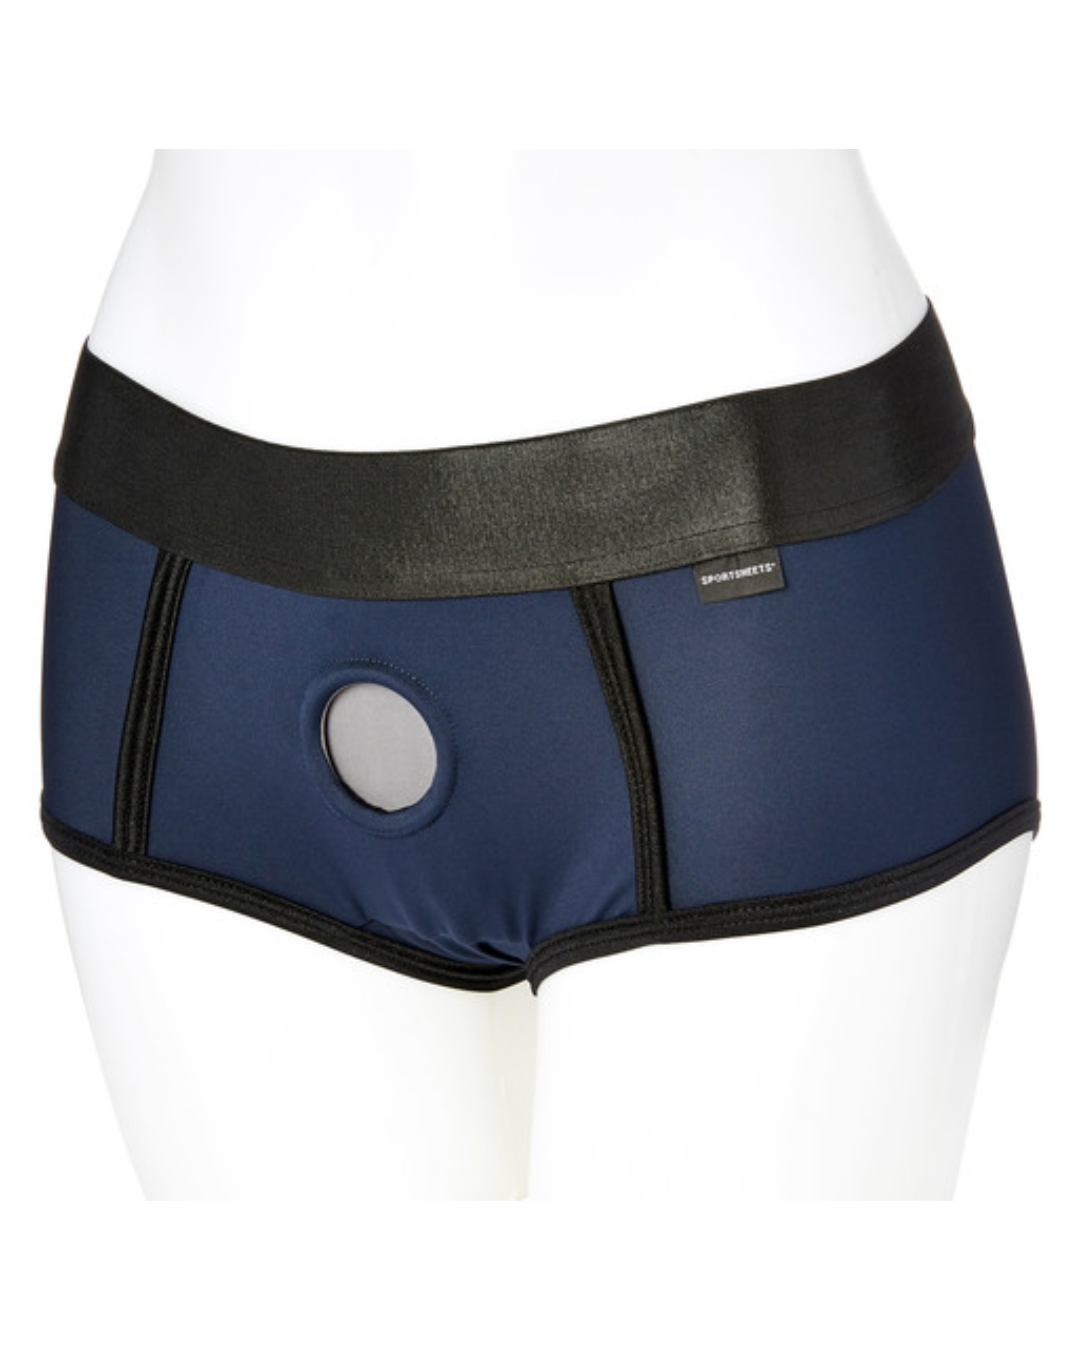 Em. Ex. Fit Strap-On Harness Brief - Navy Blue Small to XXXL worn on a mannequin front view